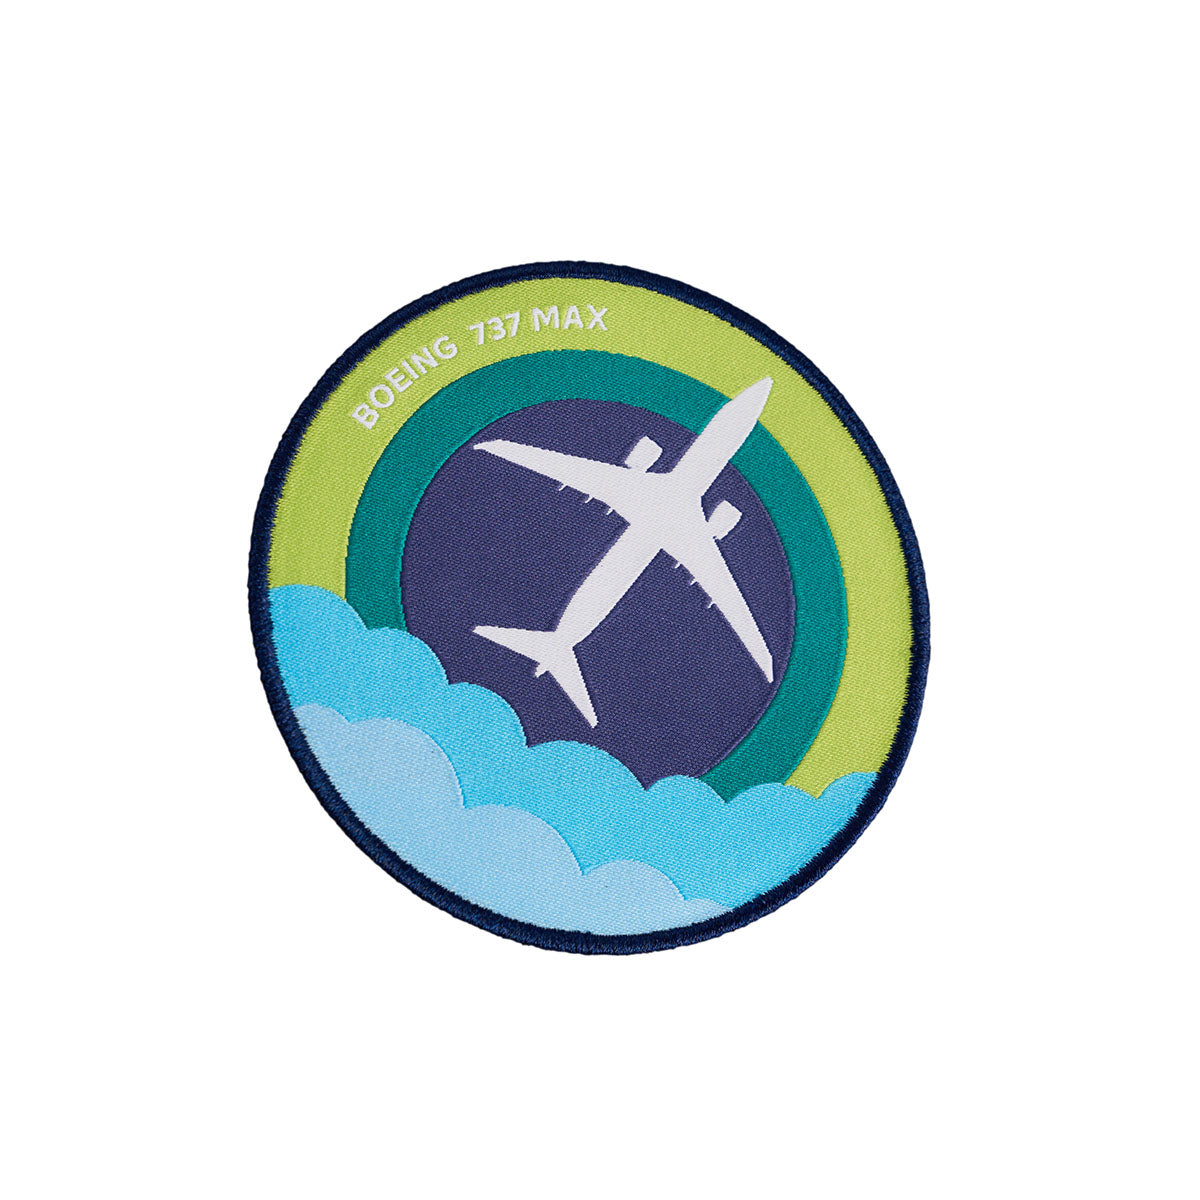 Skyward patch, featuring the iconic Boeing 737 MAX embroidered in a roundel design.